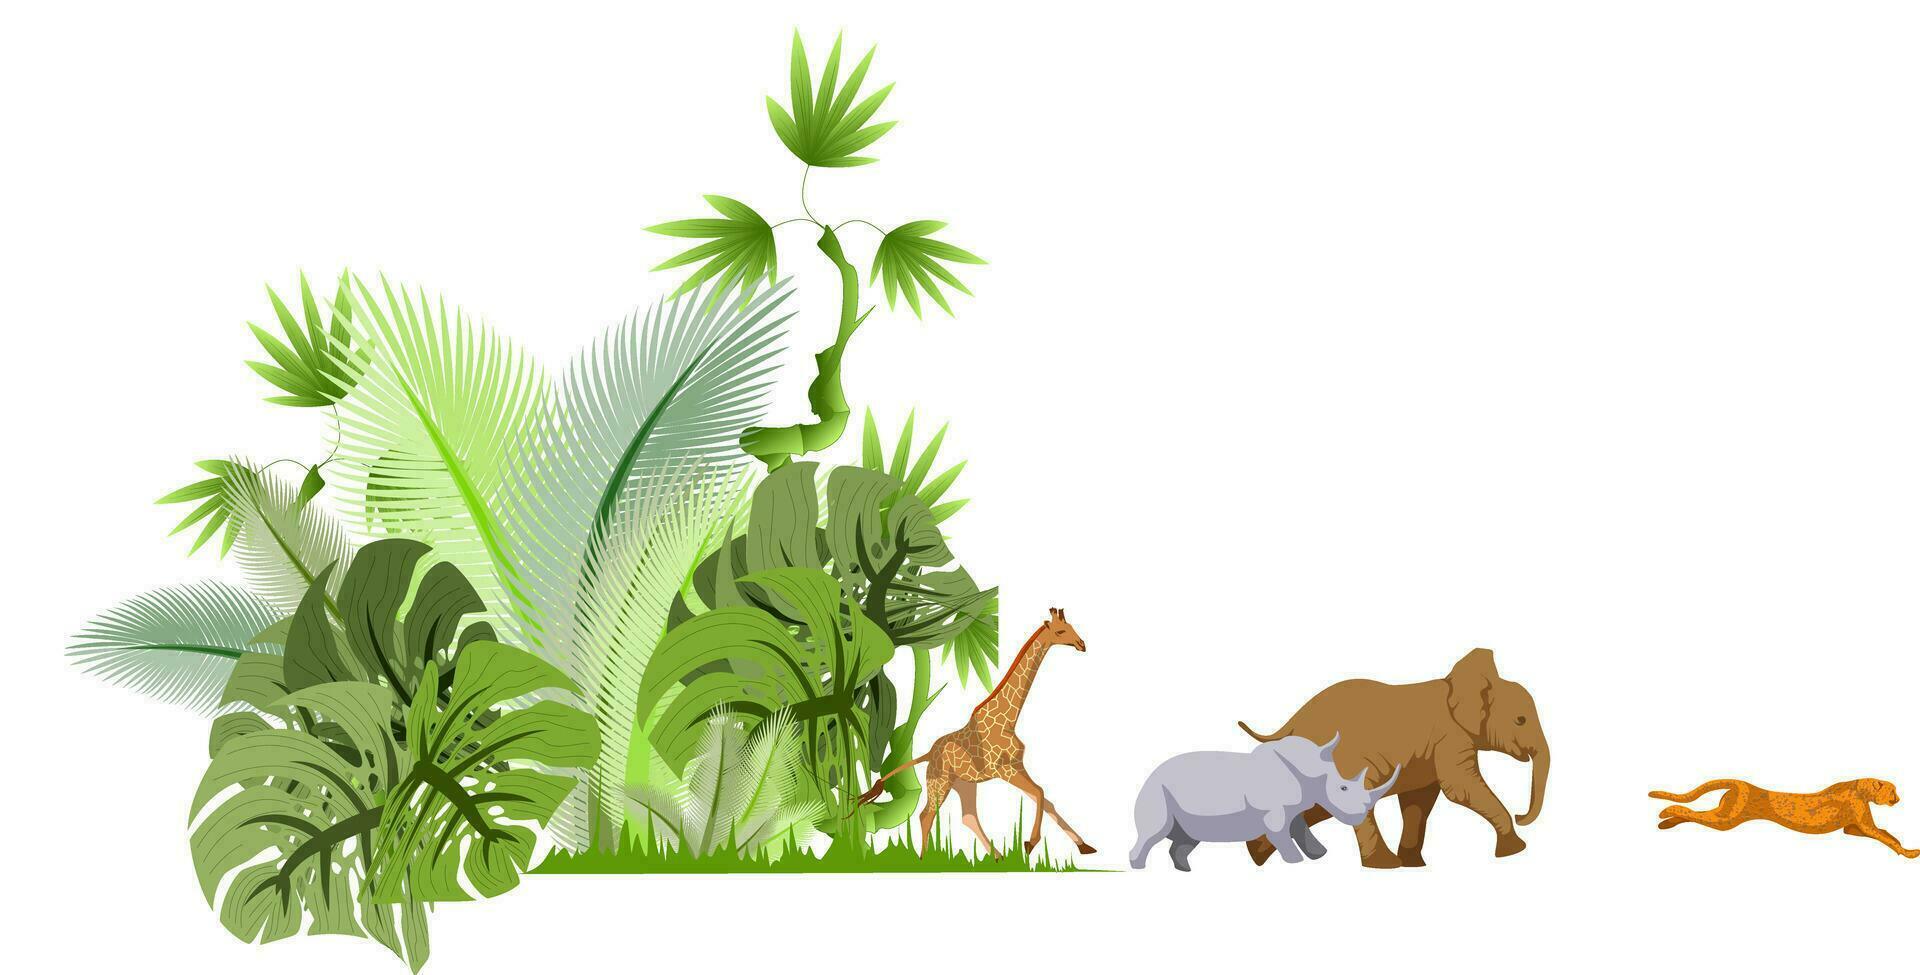 Vector image of a forest and running animals from it. Concept of global deforestation and forest fire problems